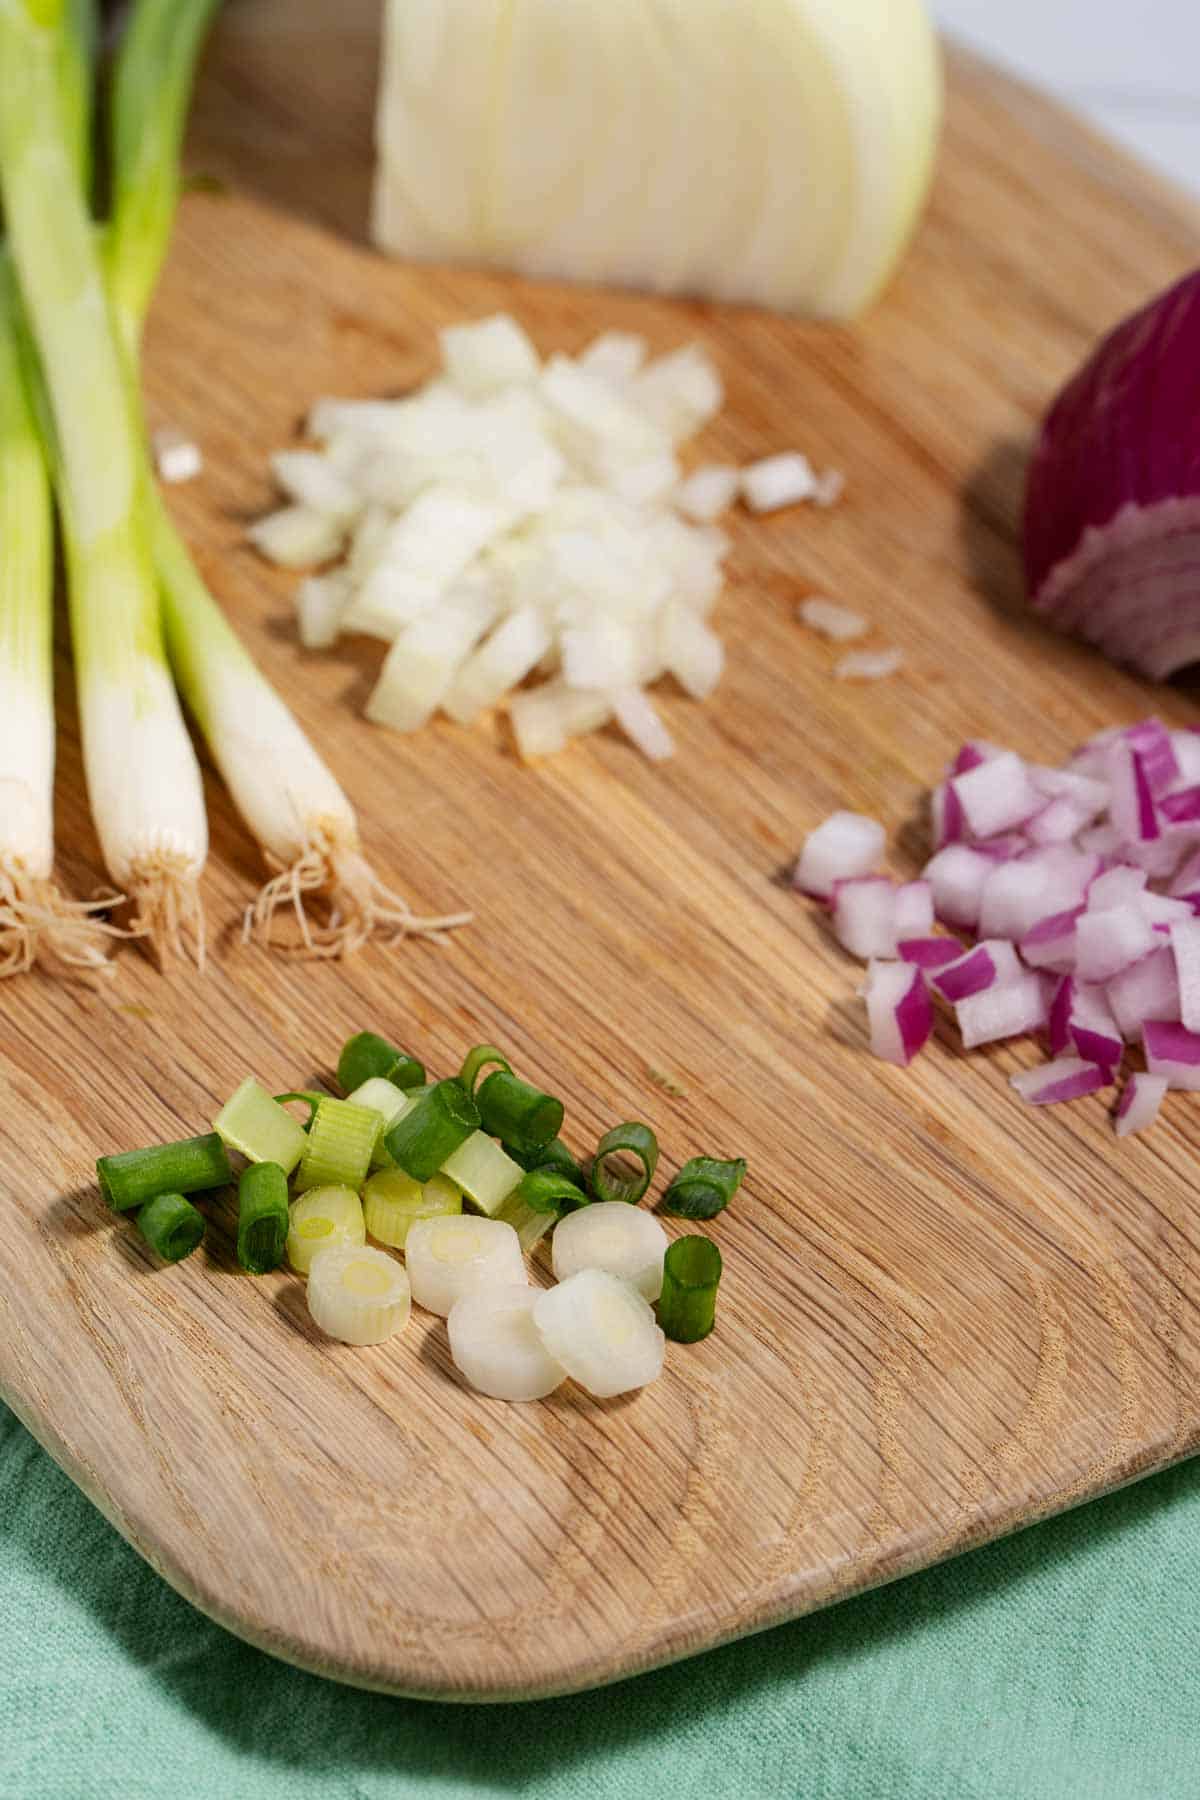 Green onions, red onions, and white onions being chopped on a cutting board.